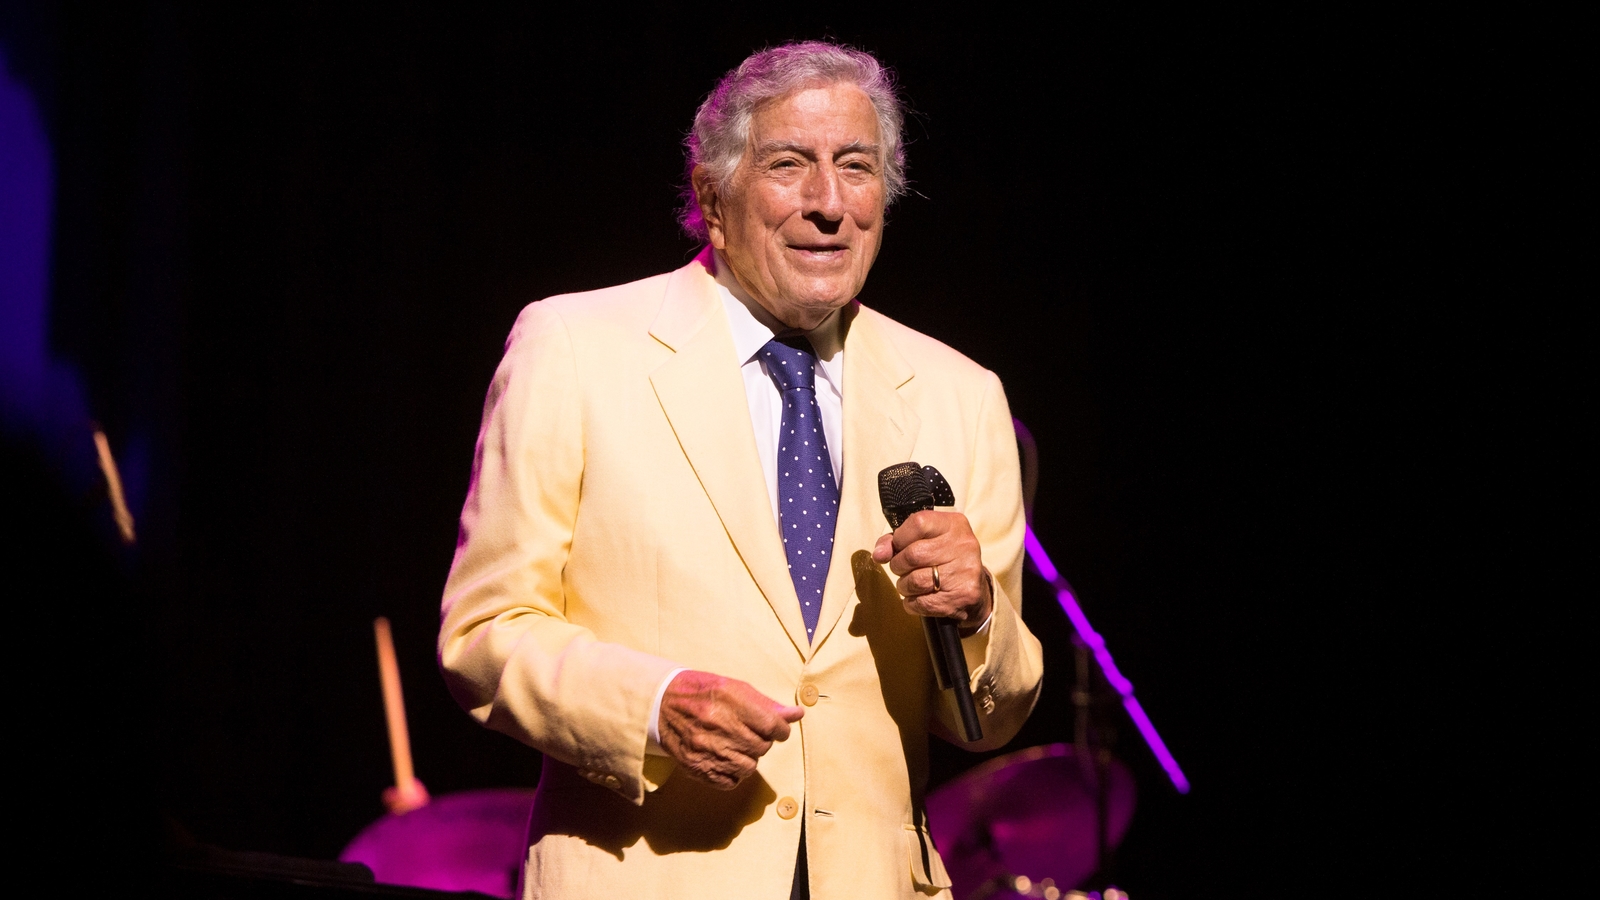 Tony Bennett Death Masterful Singer Known For I Left My Heart In San Francisco Dies At 96 4918